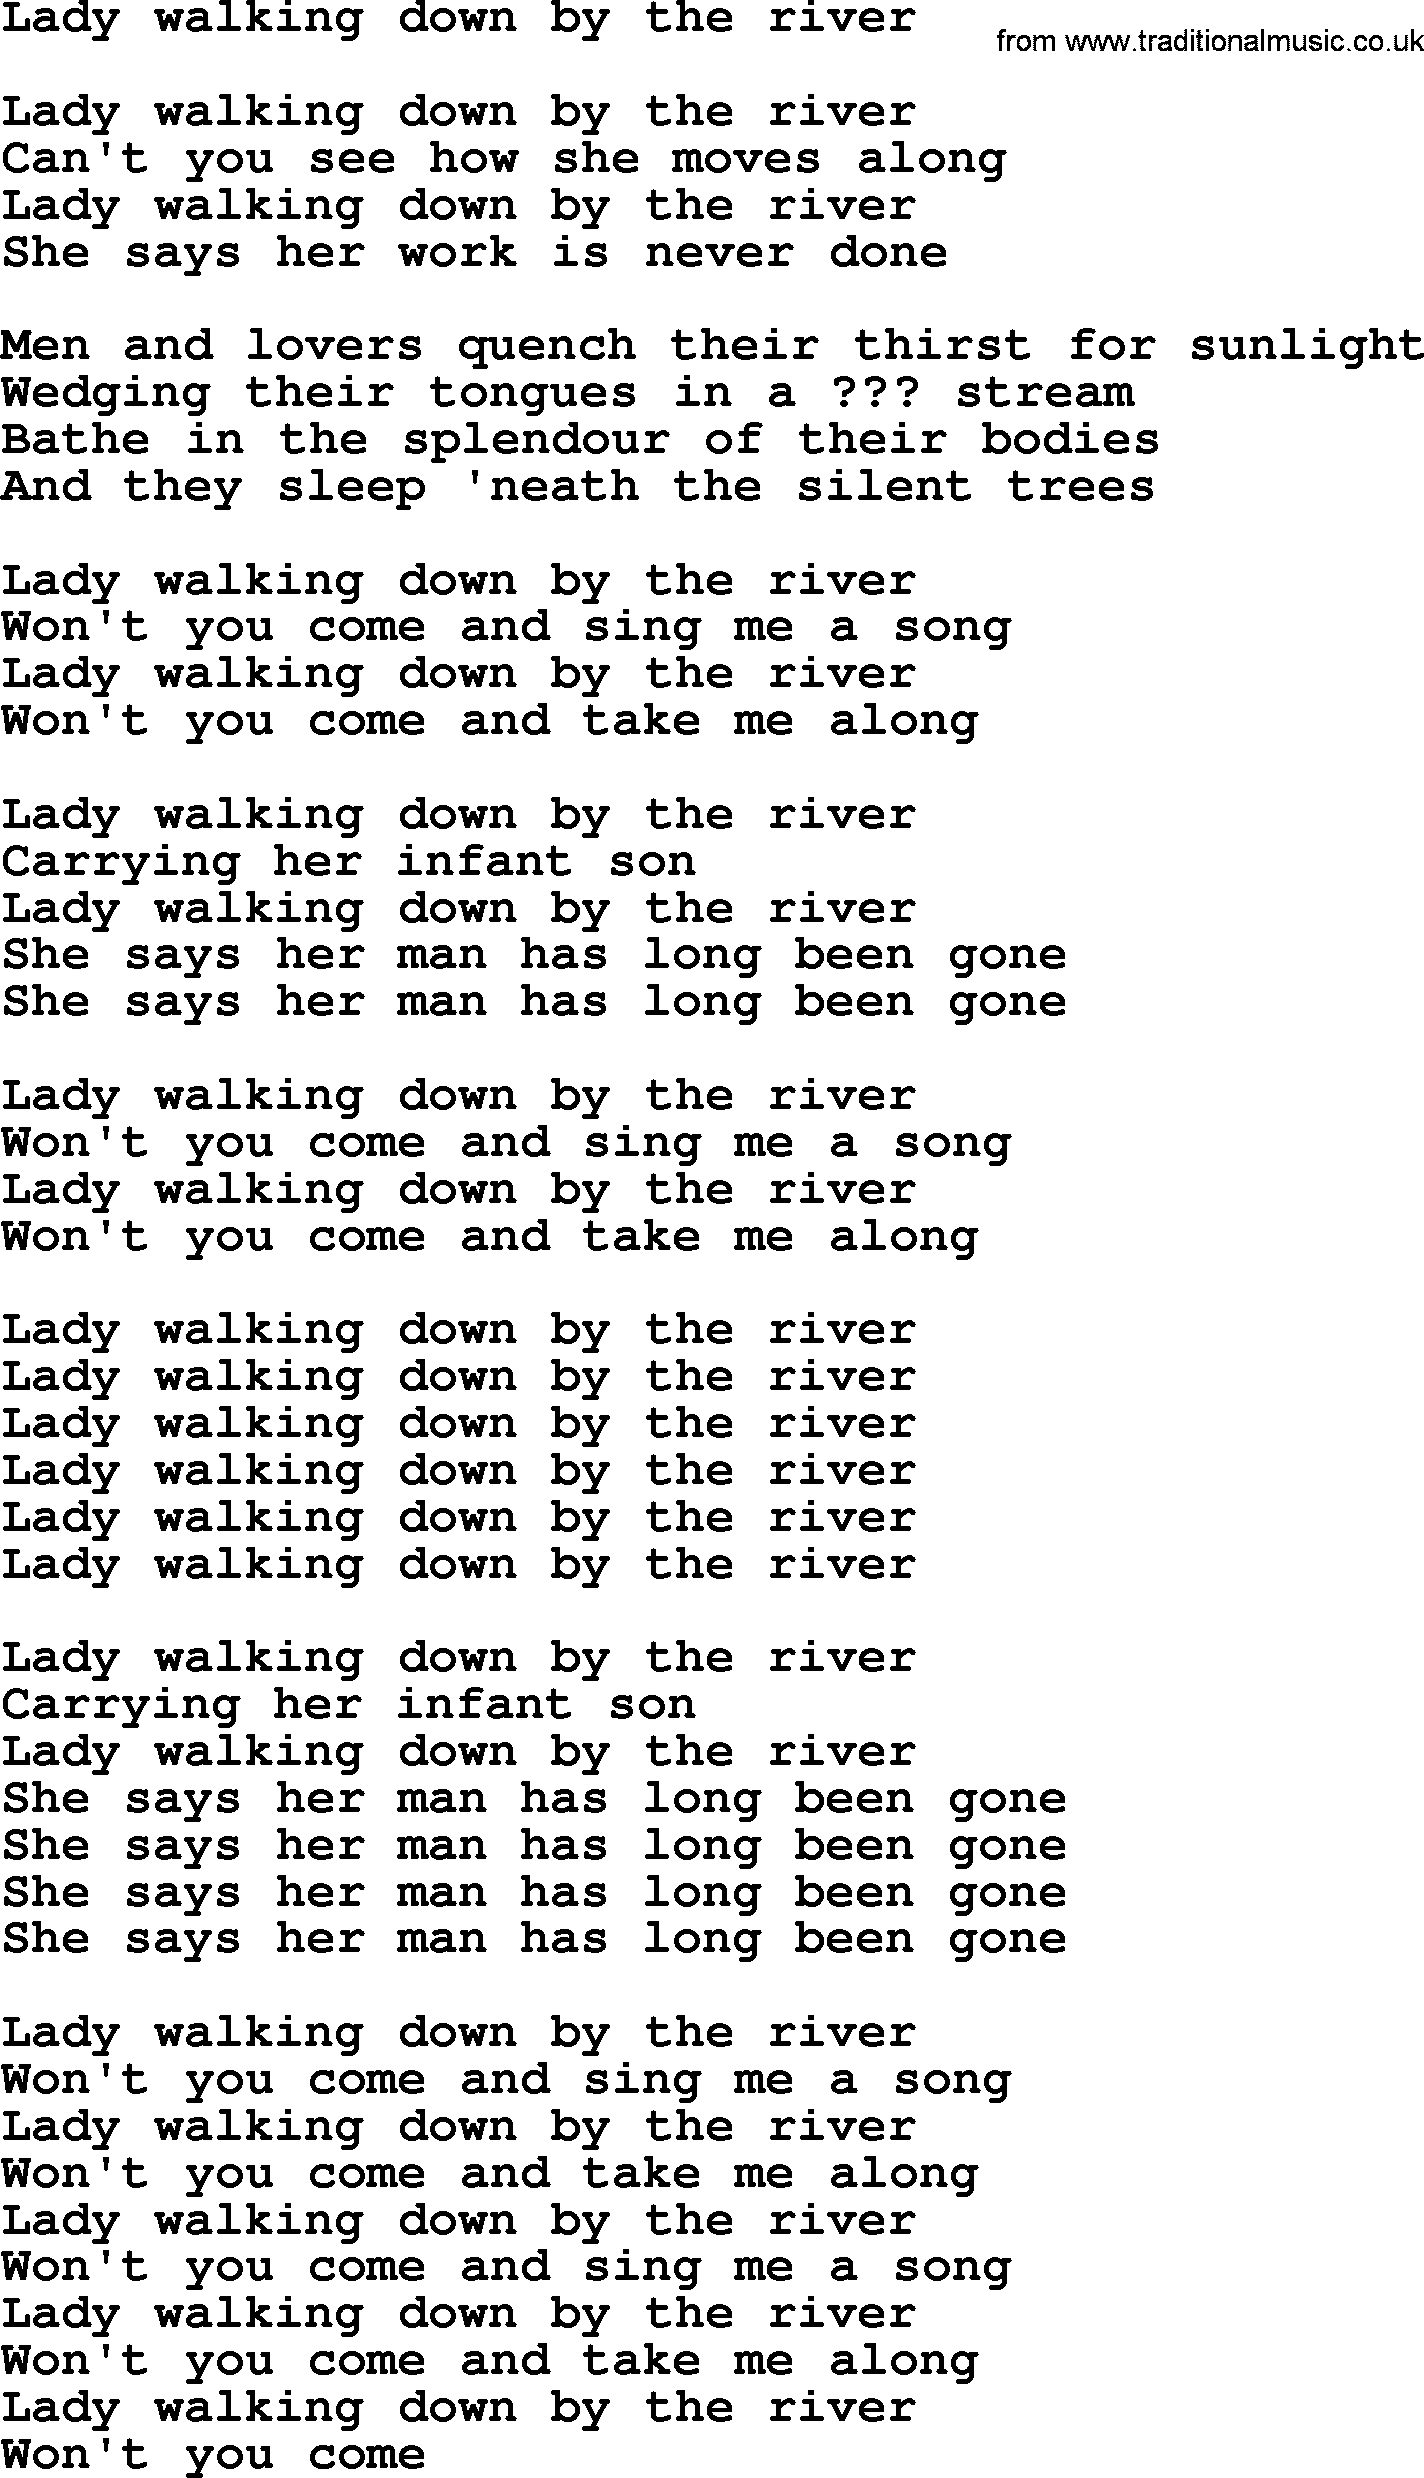 Bruce Springsteen song: Lady Walking Down By The River lyrics